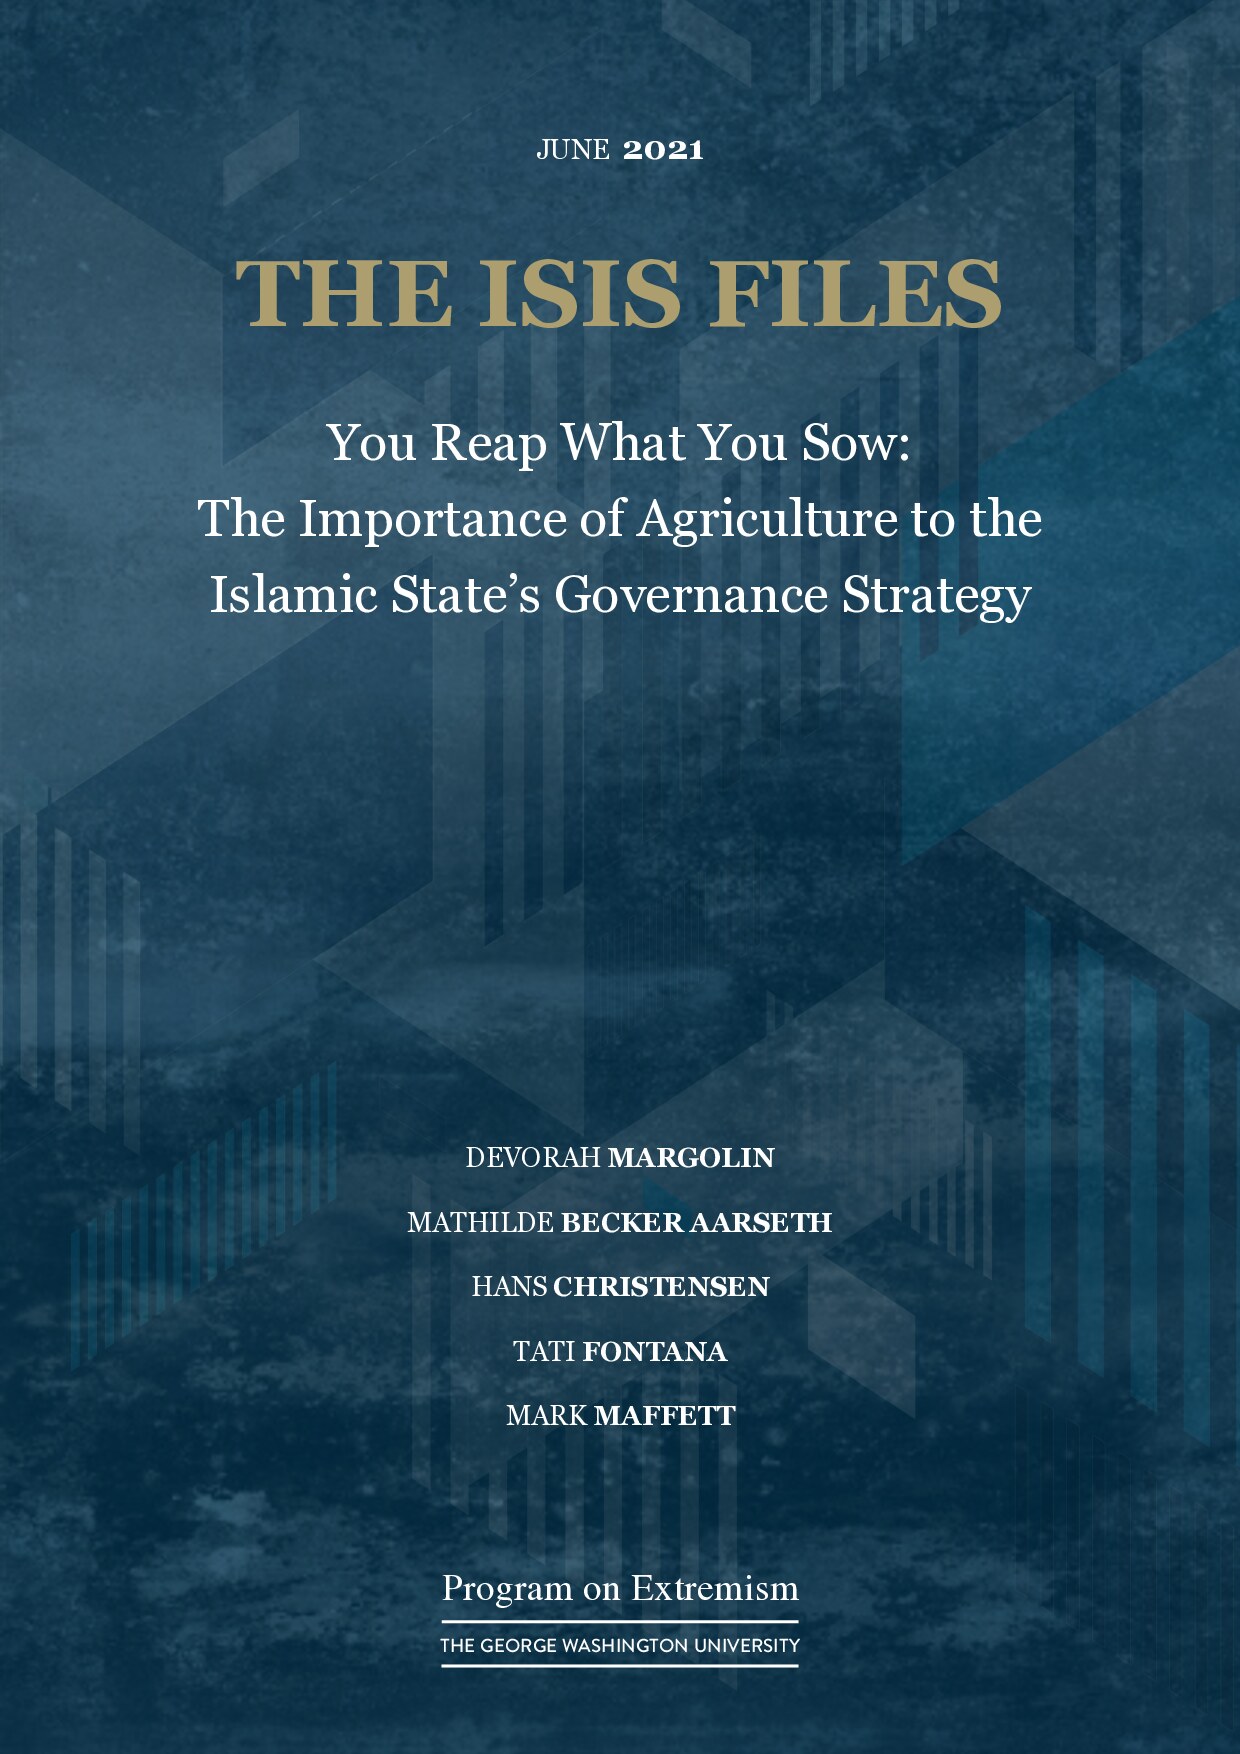 The ISIS Files - You Reap What You Sow:  The Importance of Agriculture to the Islamic State’s Governance Strategy